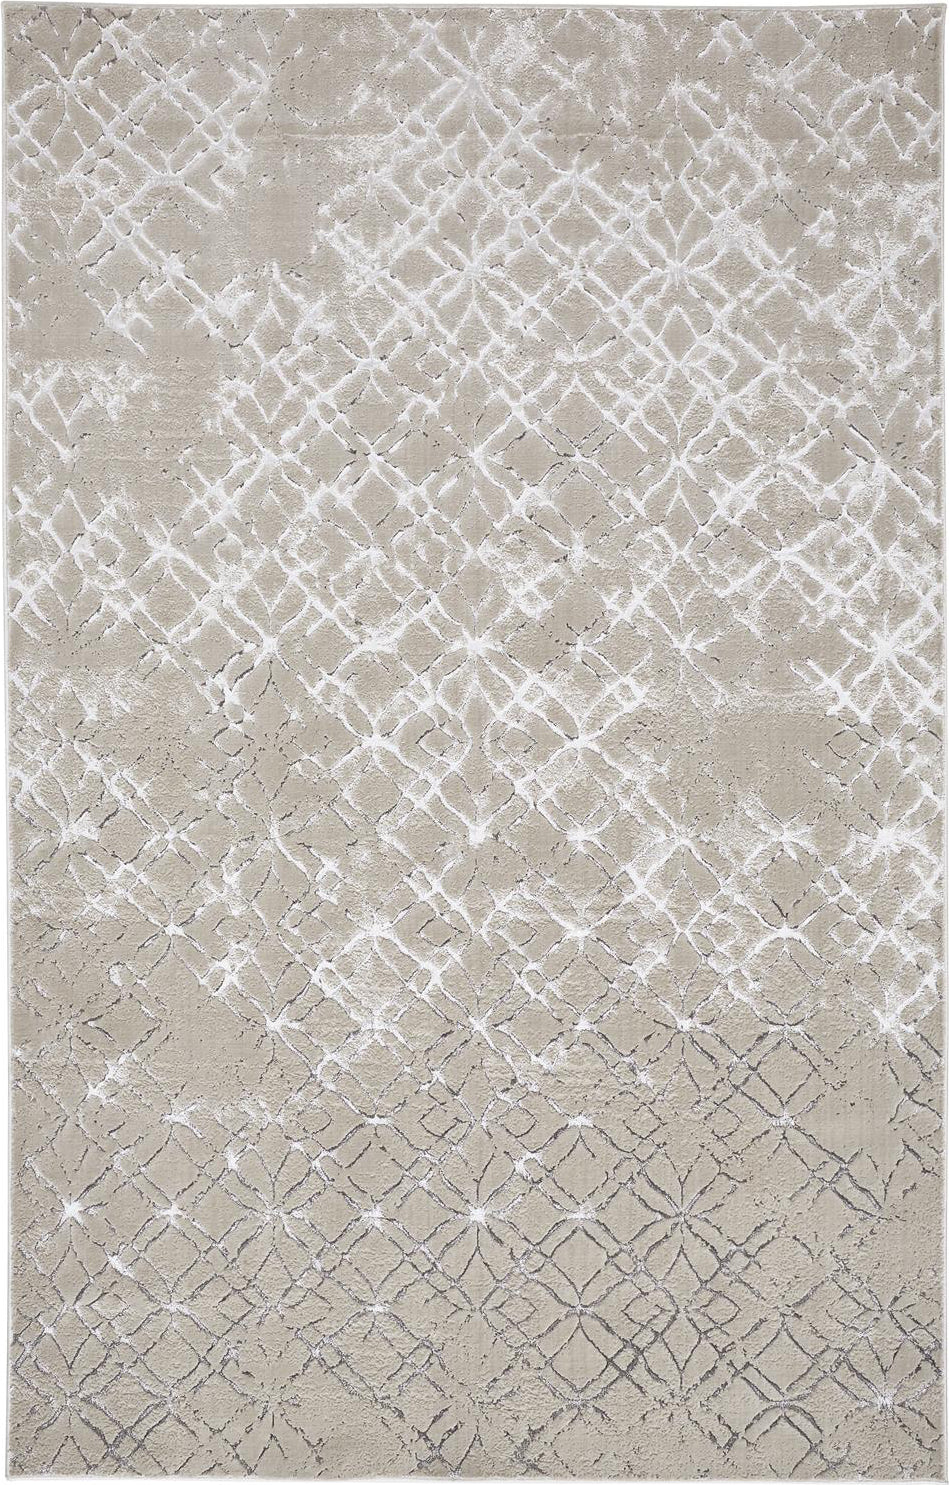 Feizy Micah 3047F Beige/Silver Area Rug main image